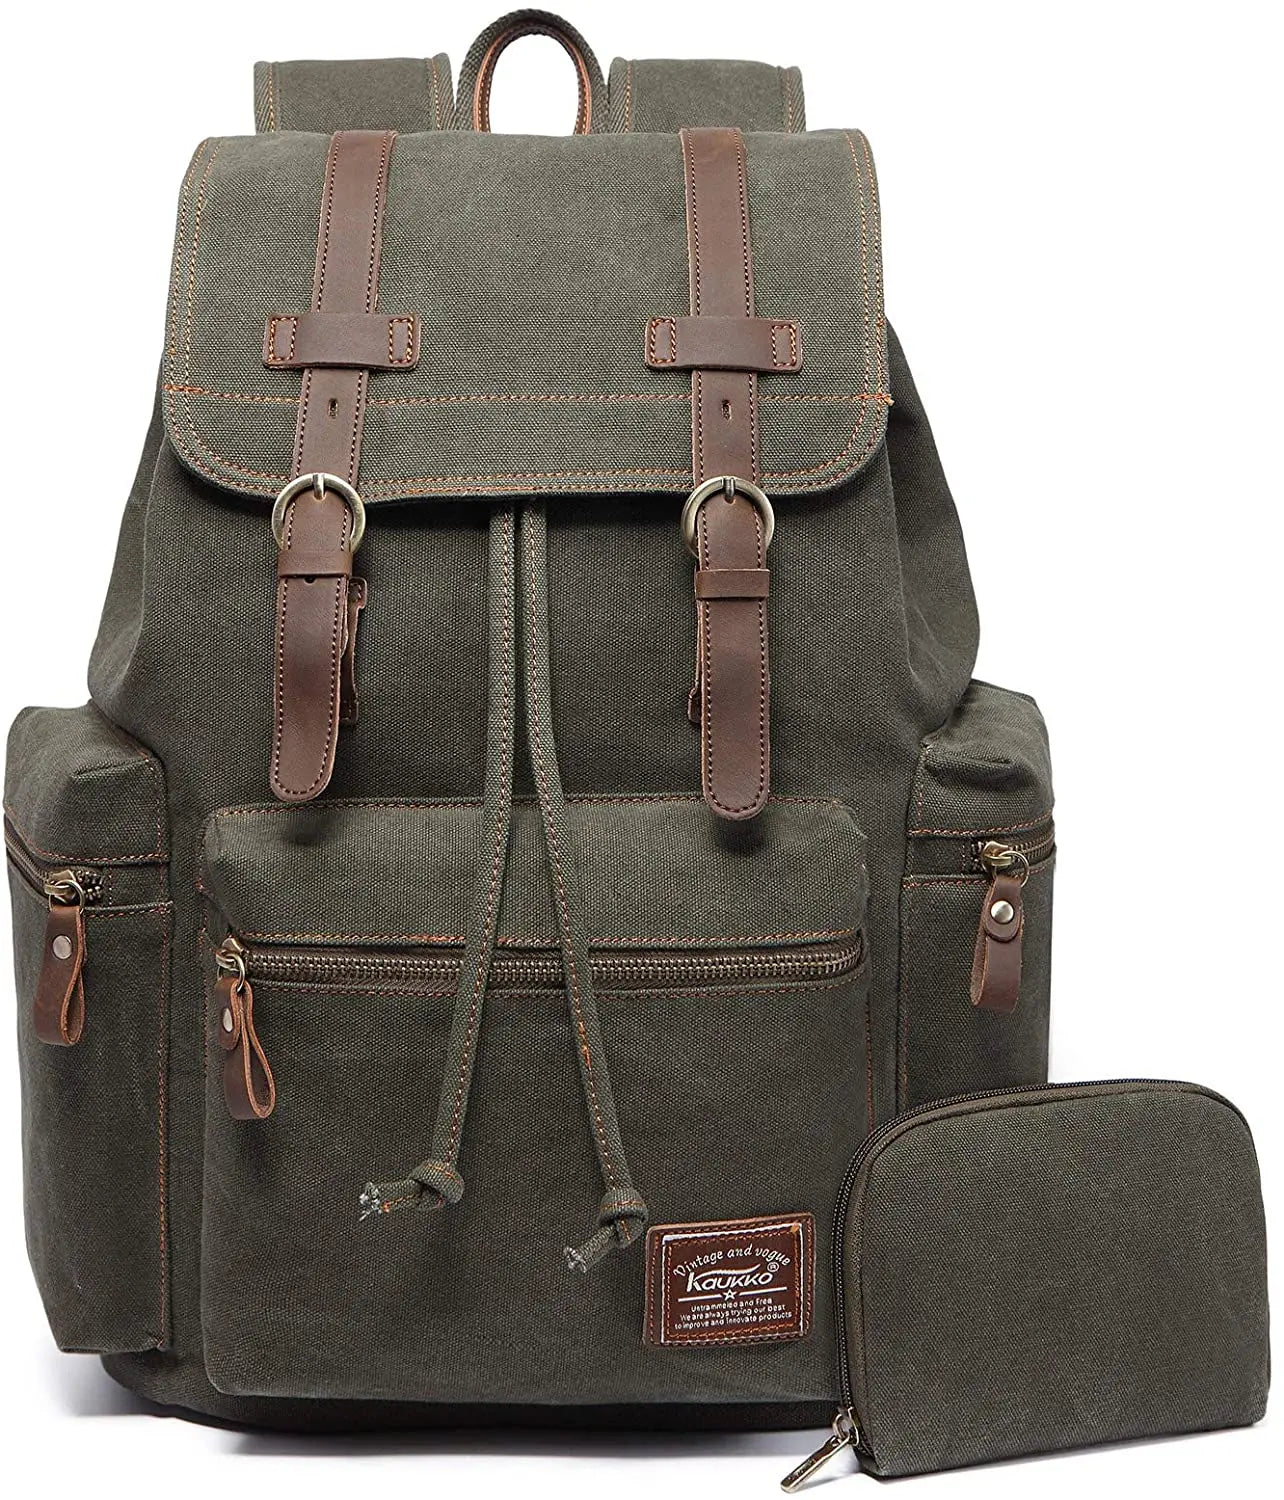 Vintage Canvas Backpack Army green set